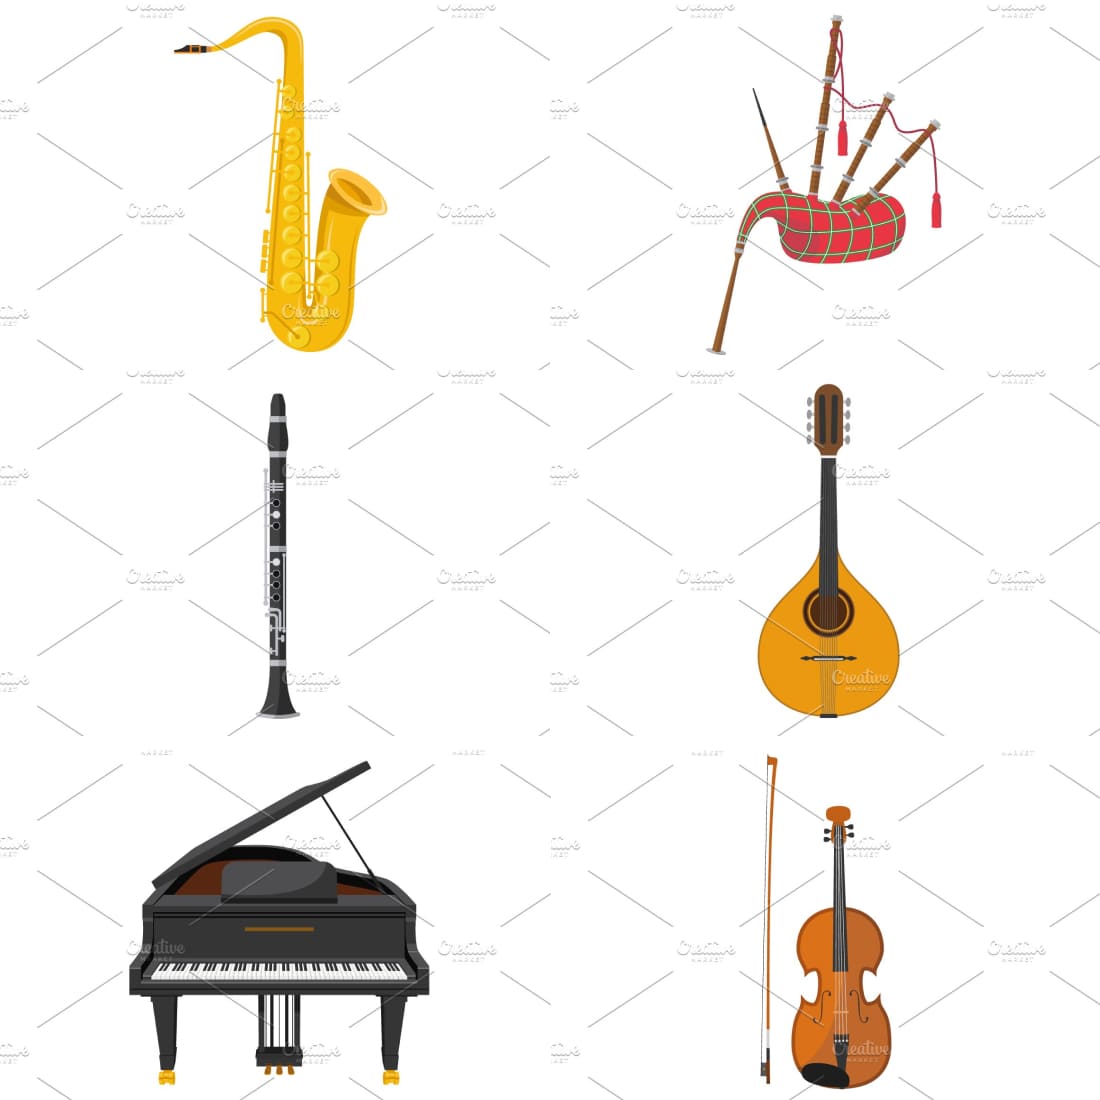 Bundle of gorgeous cartoon images of musical instruments.